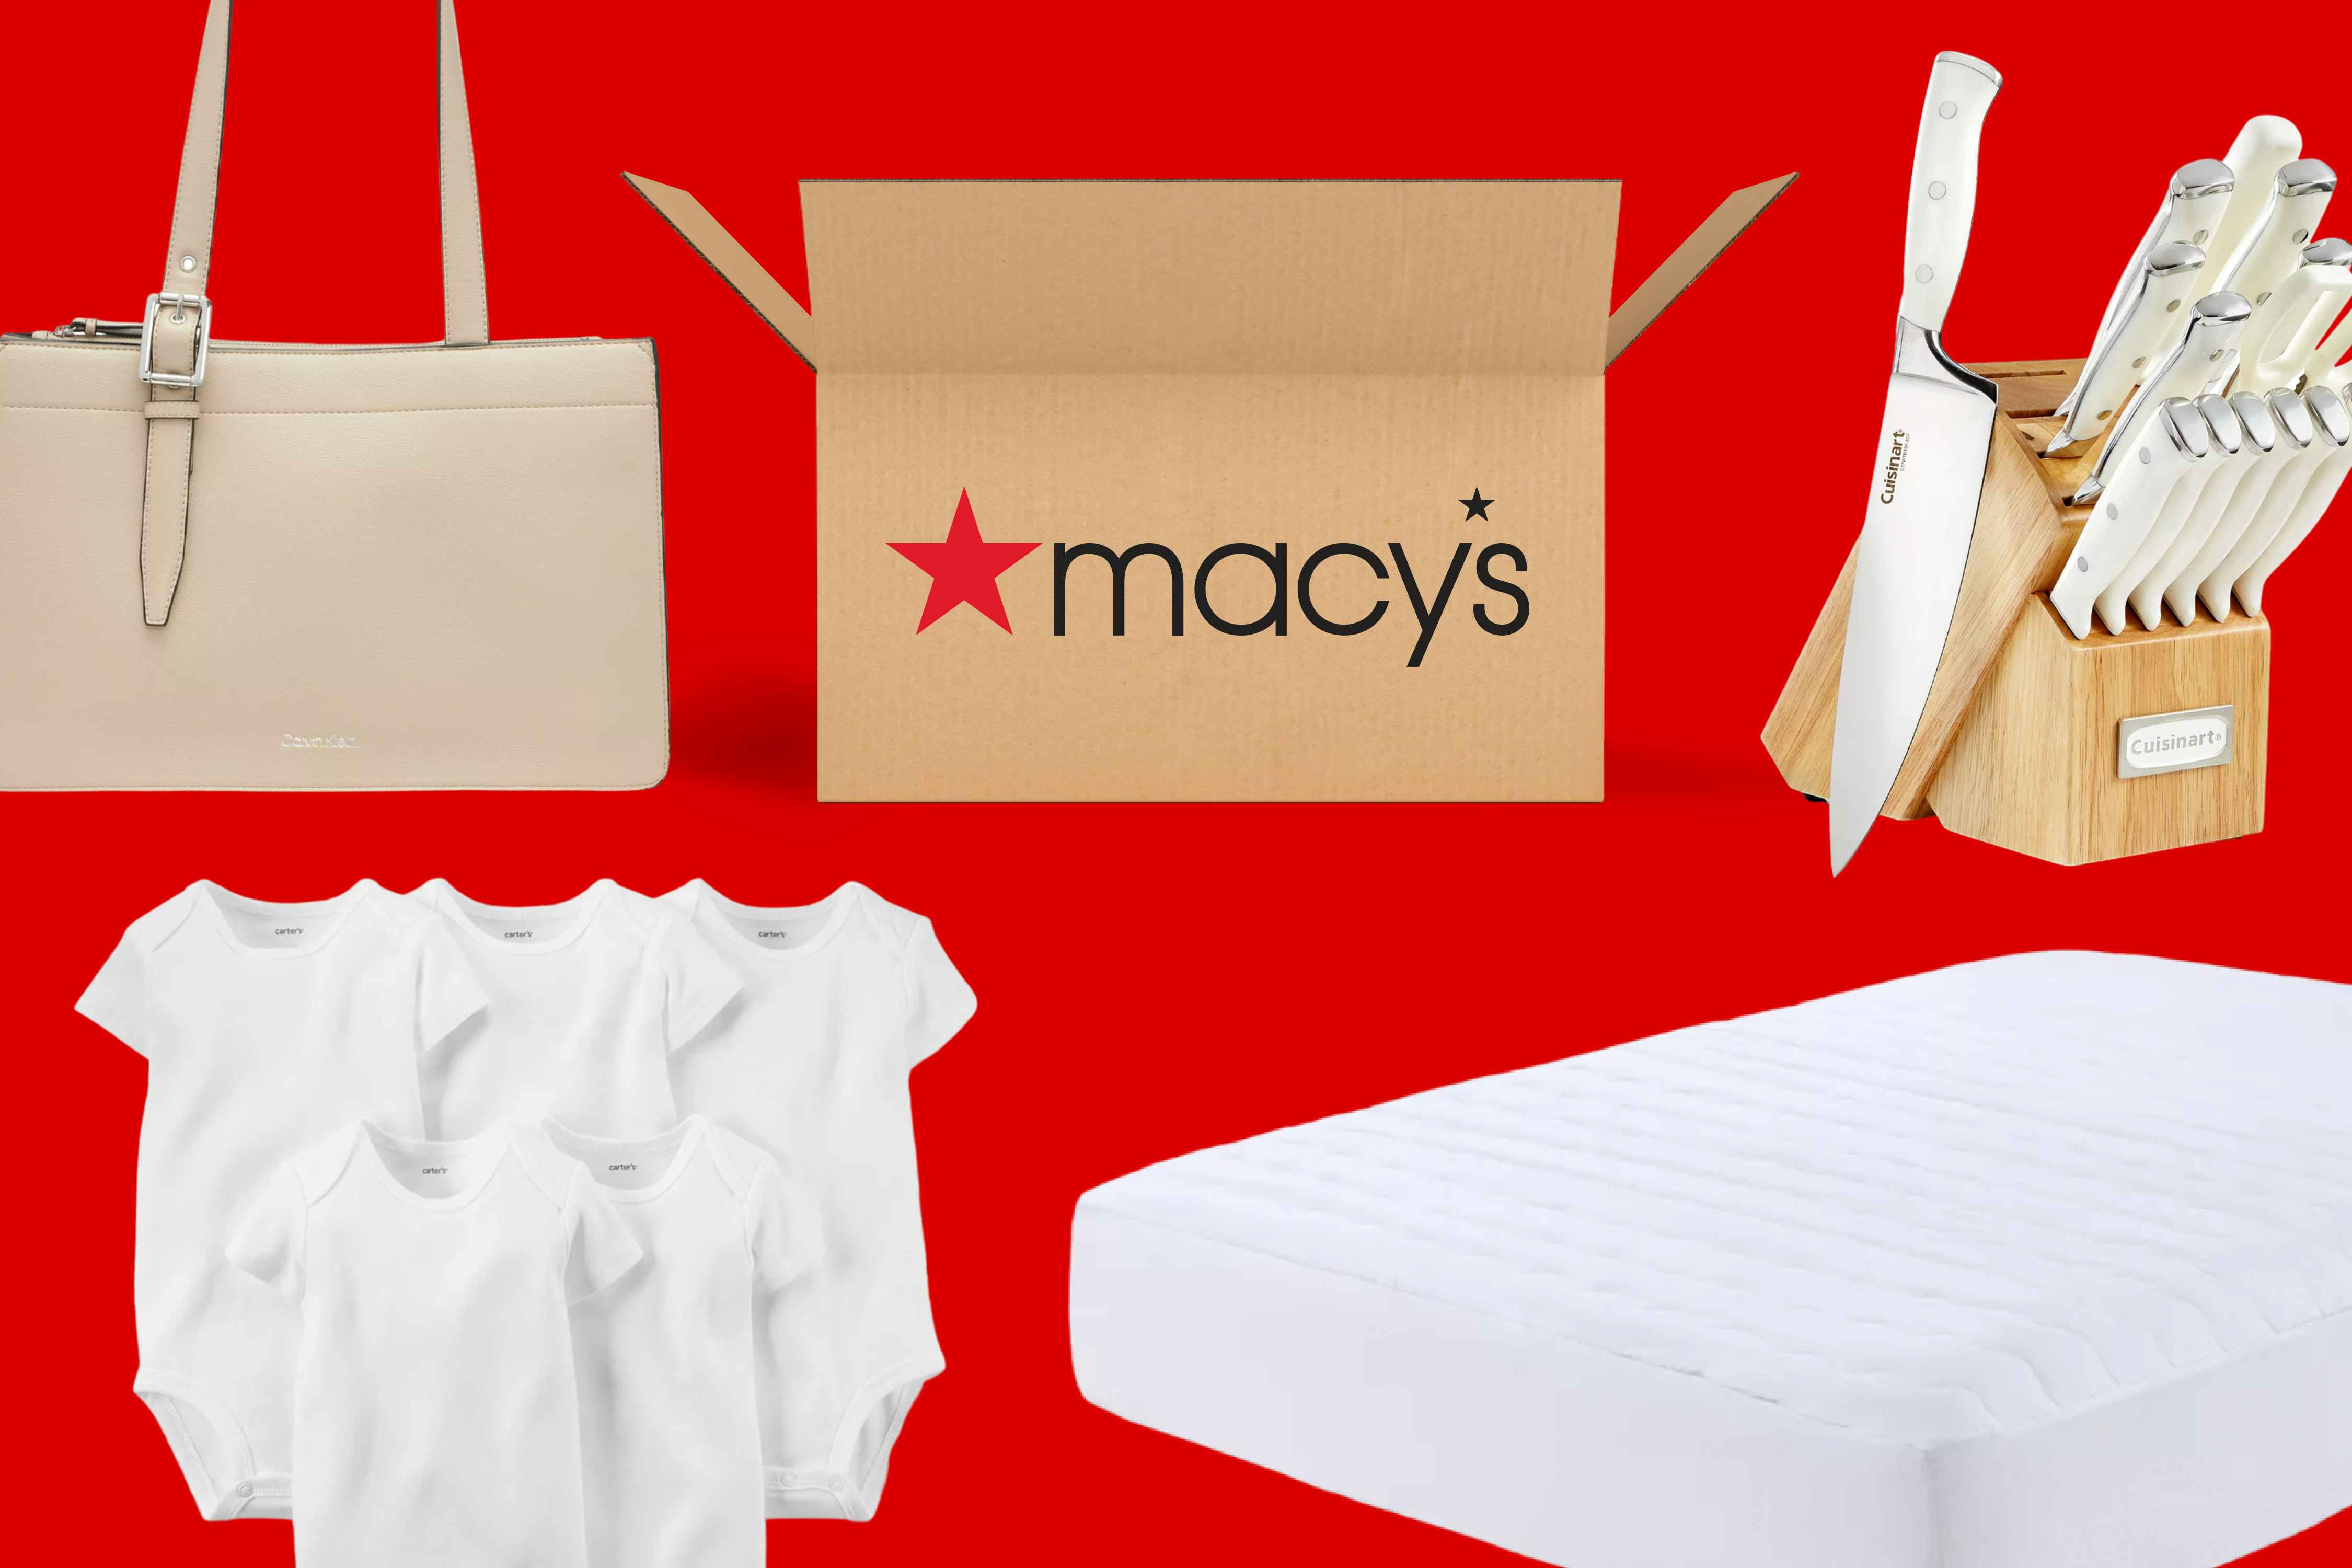 $10 Carter's Bodysuit Pack, $71 Calvin Klein Tote, and More at Macy's